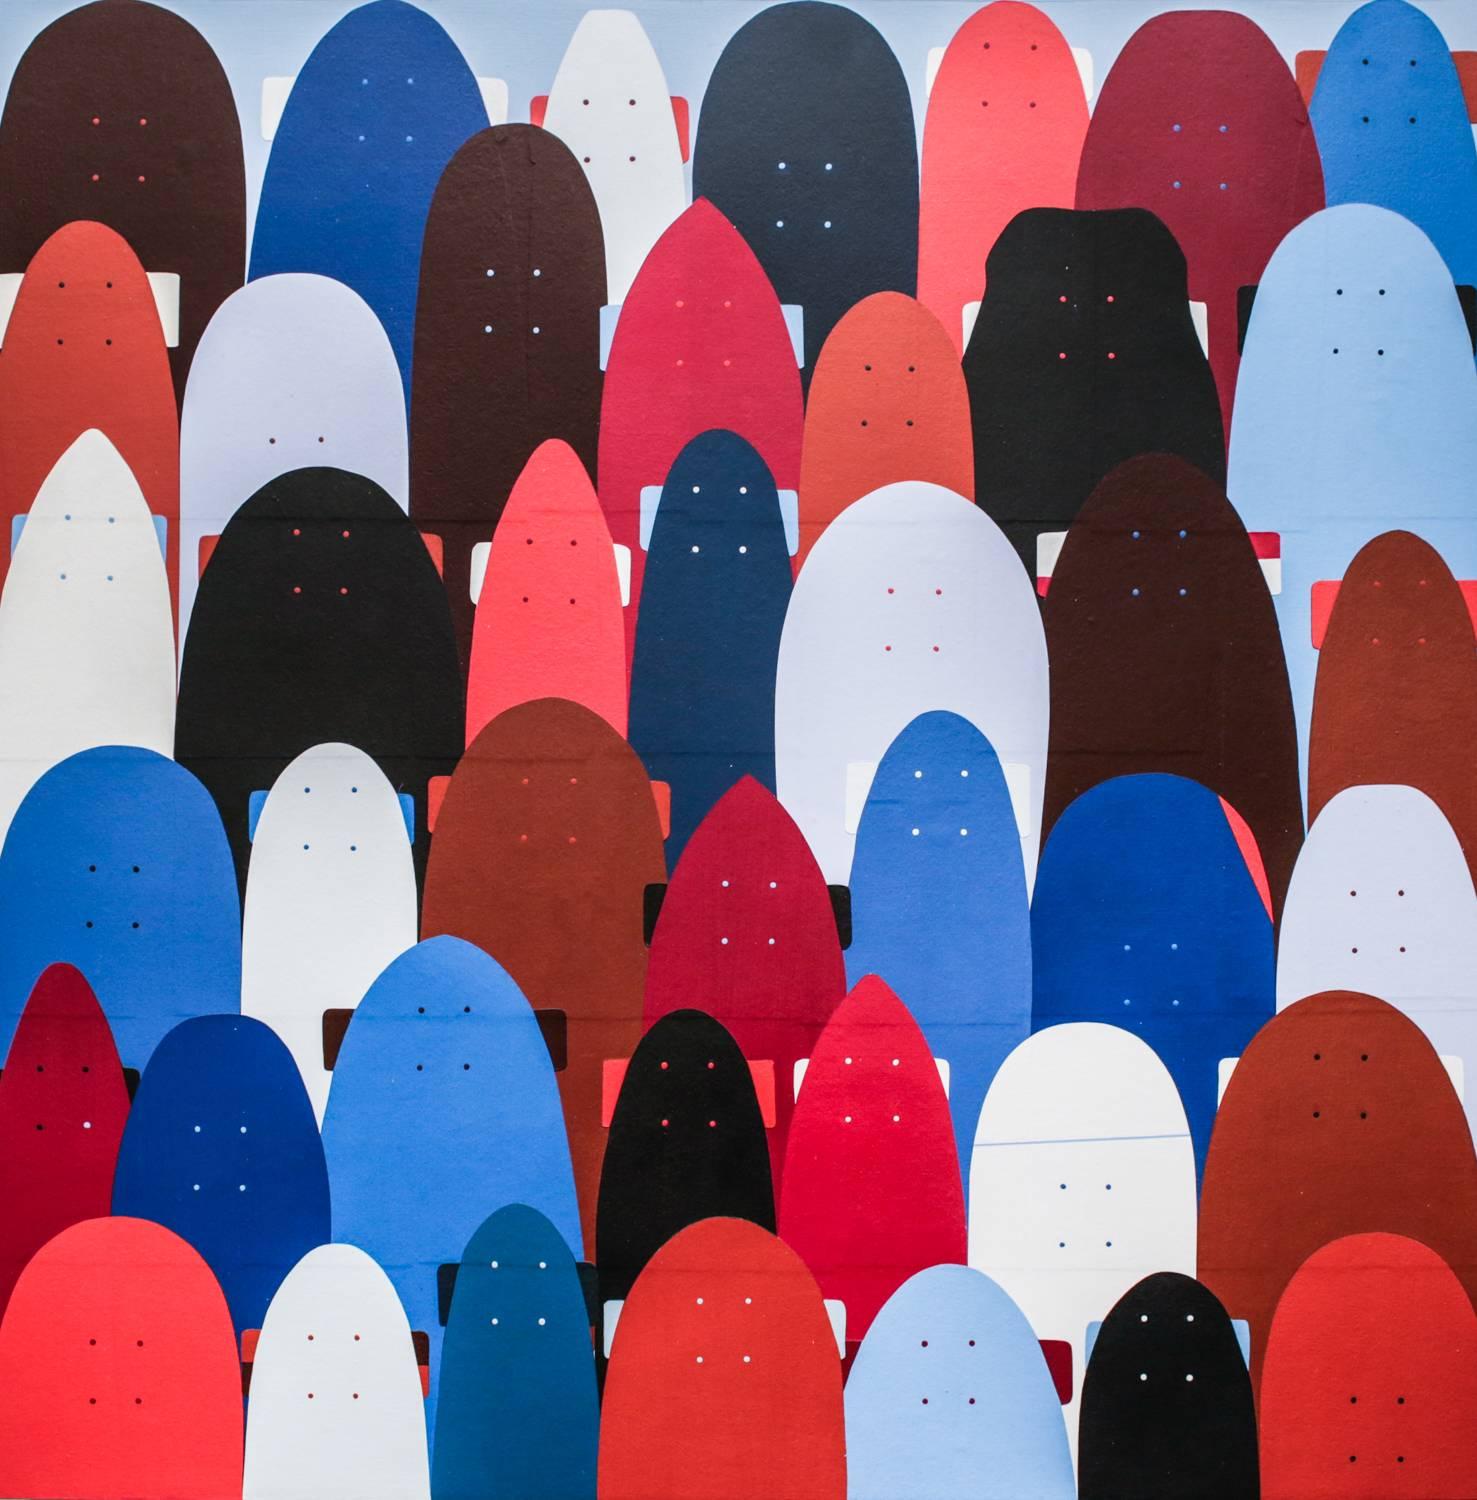 Jim Houser Abstract Painting – "THE LINE UP" Collage on panel, skateboard motifs, pattern, red white blue